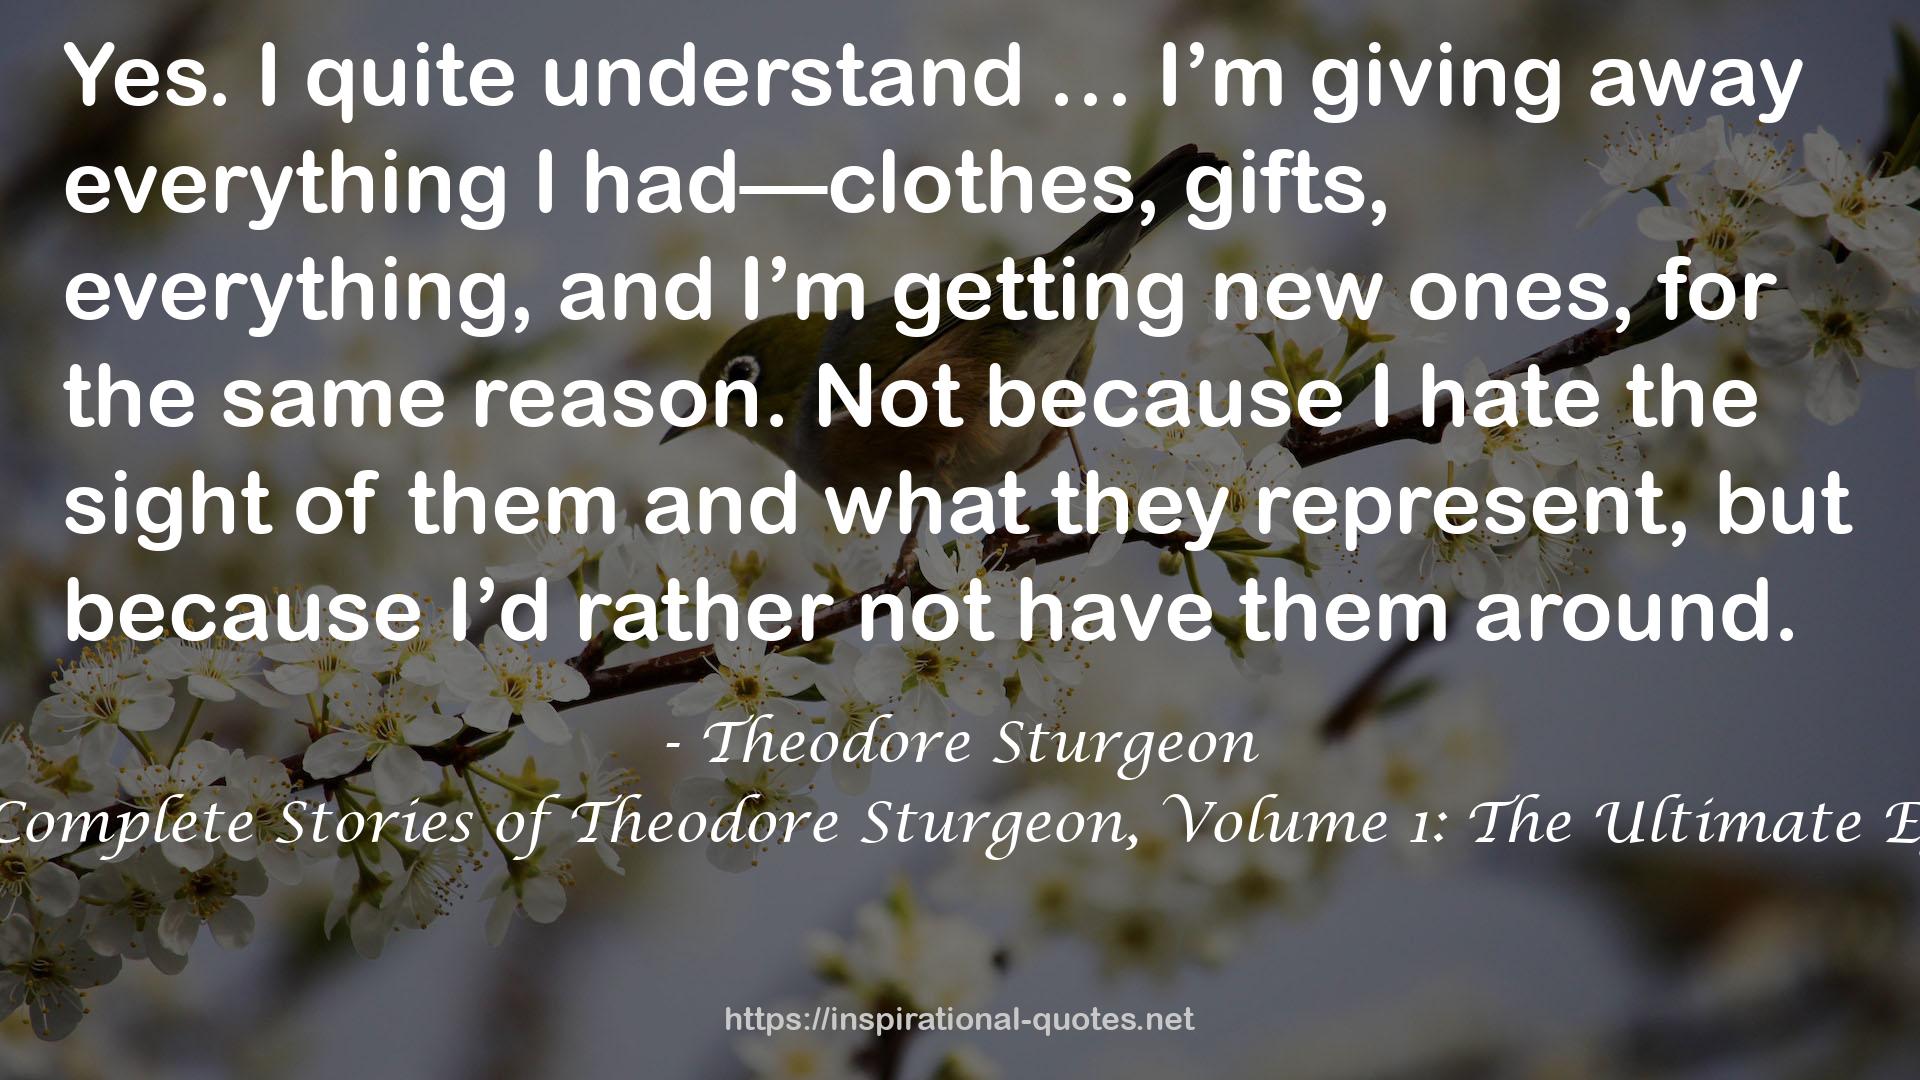 The Complete Stories of Theodore Sturgeon, Volume 1: The Ultimate Egoist QUOTES